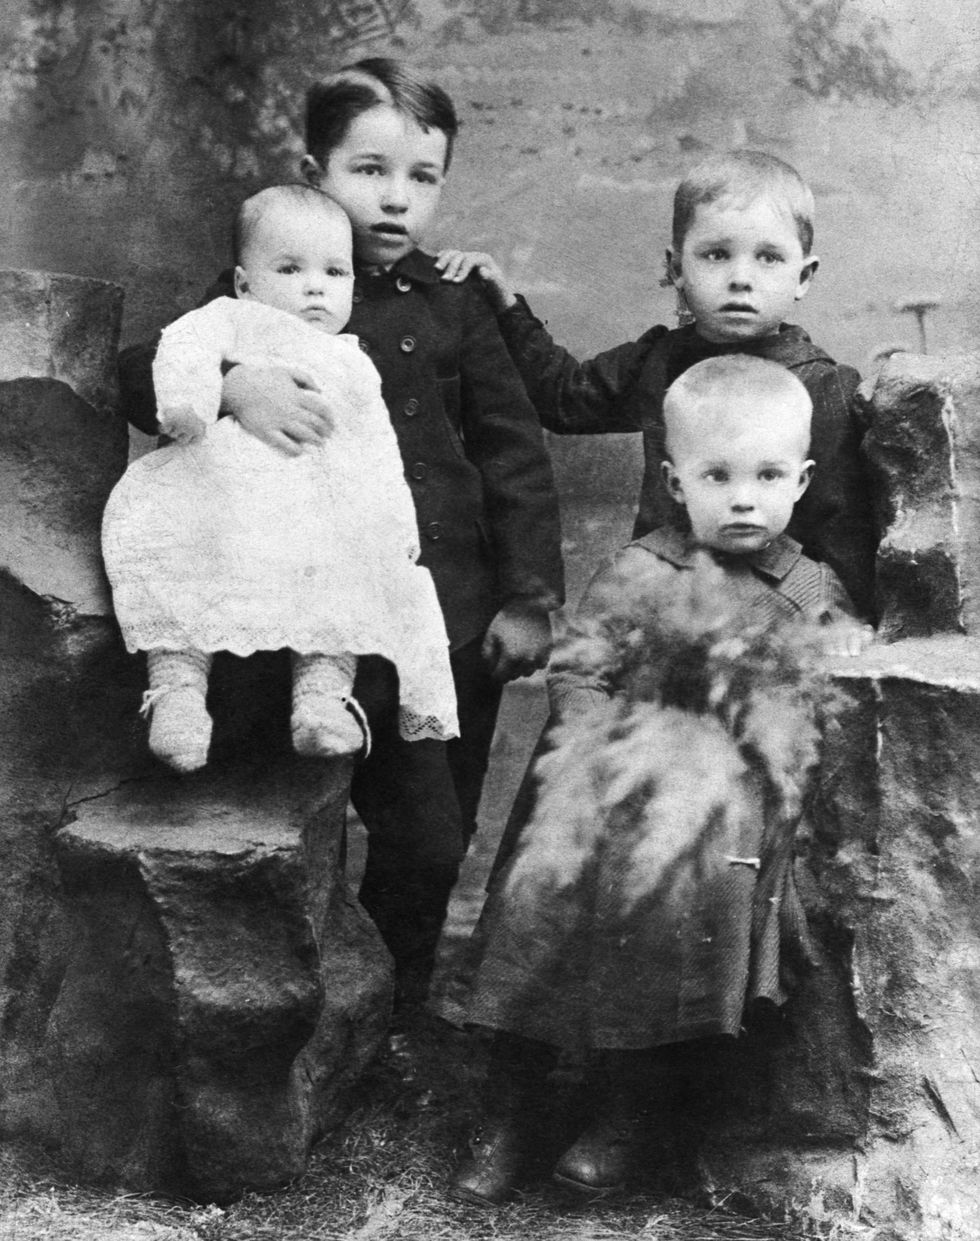 dwight eisenhower with brothers in 1893